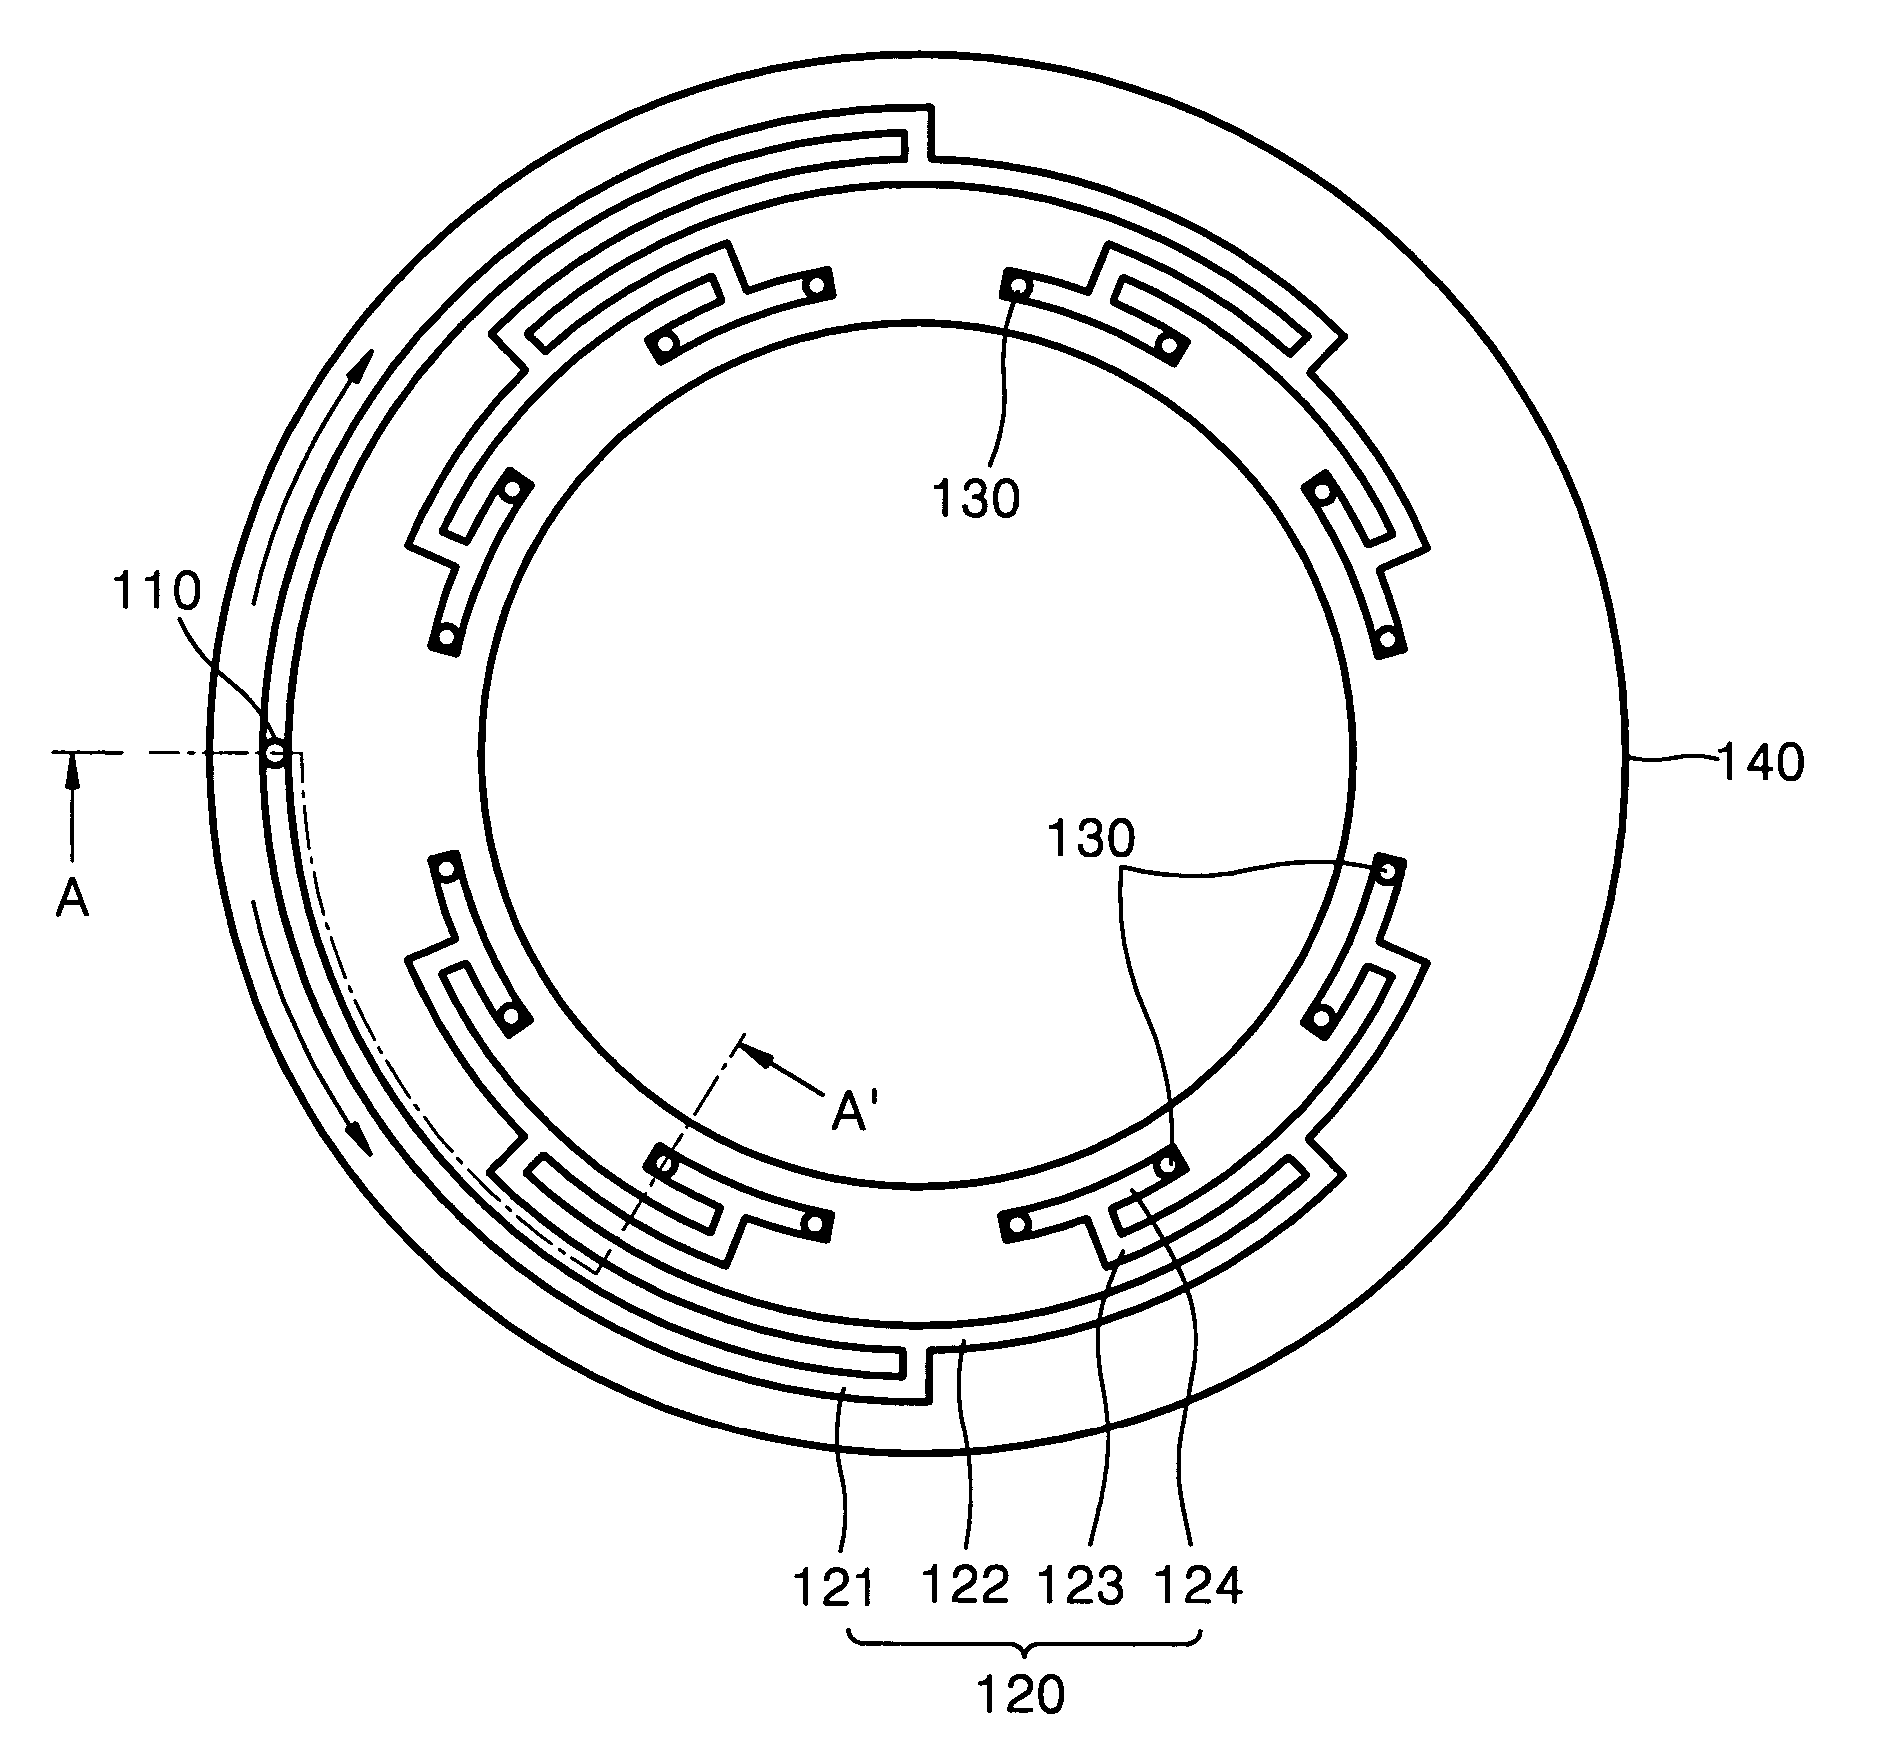 Gas injection apparatus for semiconductor processing system